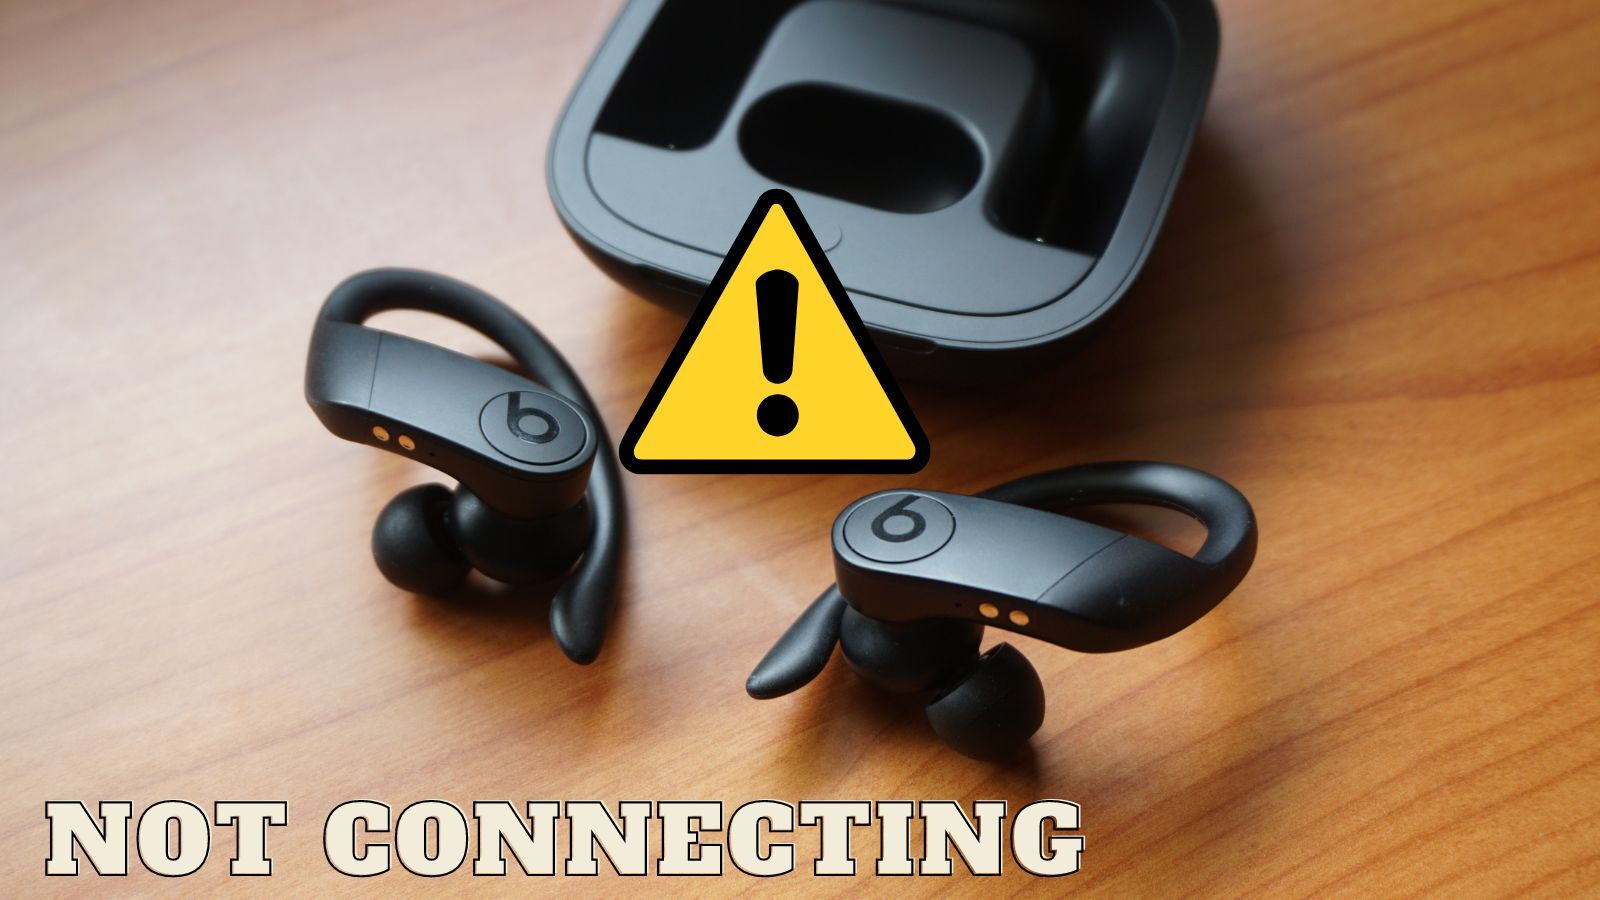 How to Fix Powerbeats Pro Not Connecting? (11 Practical Solutions)